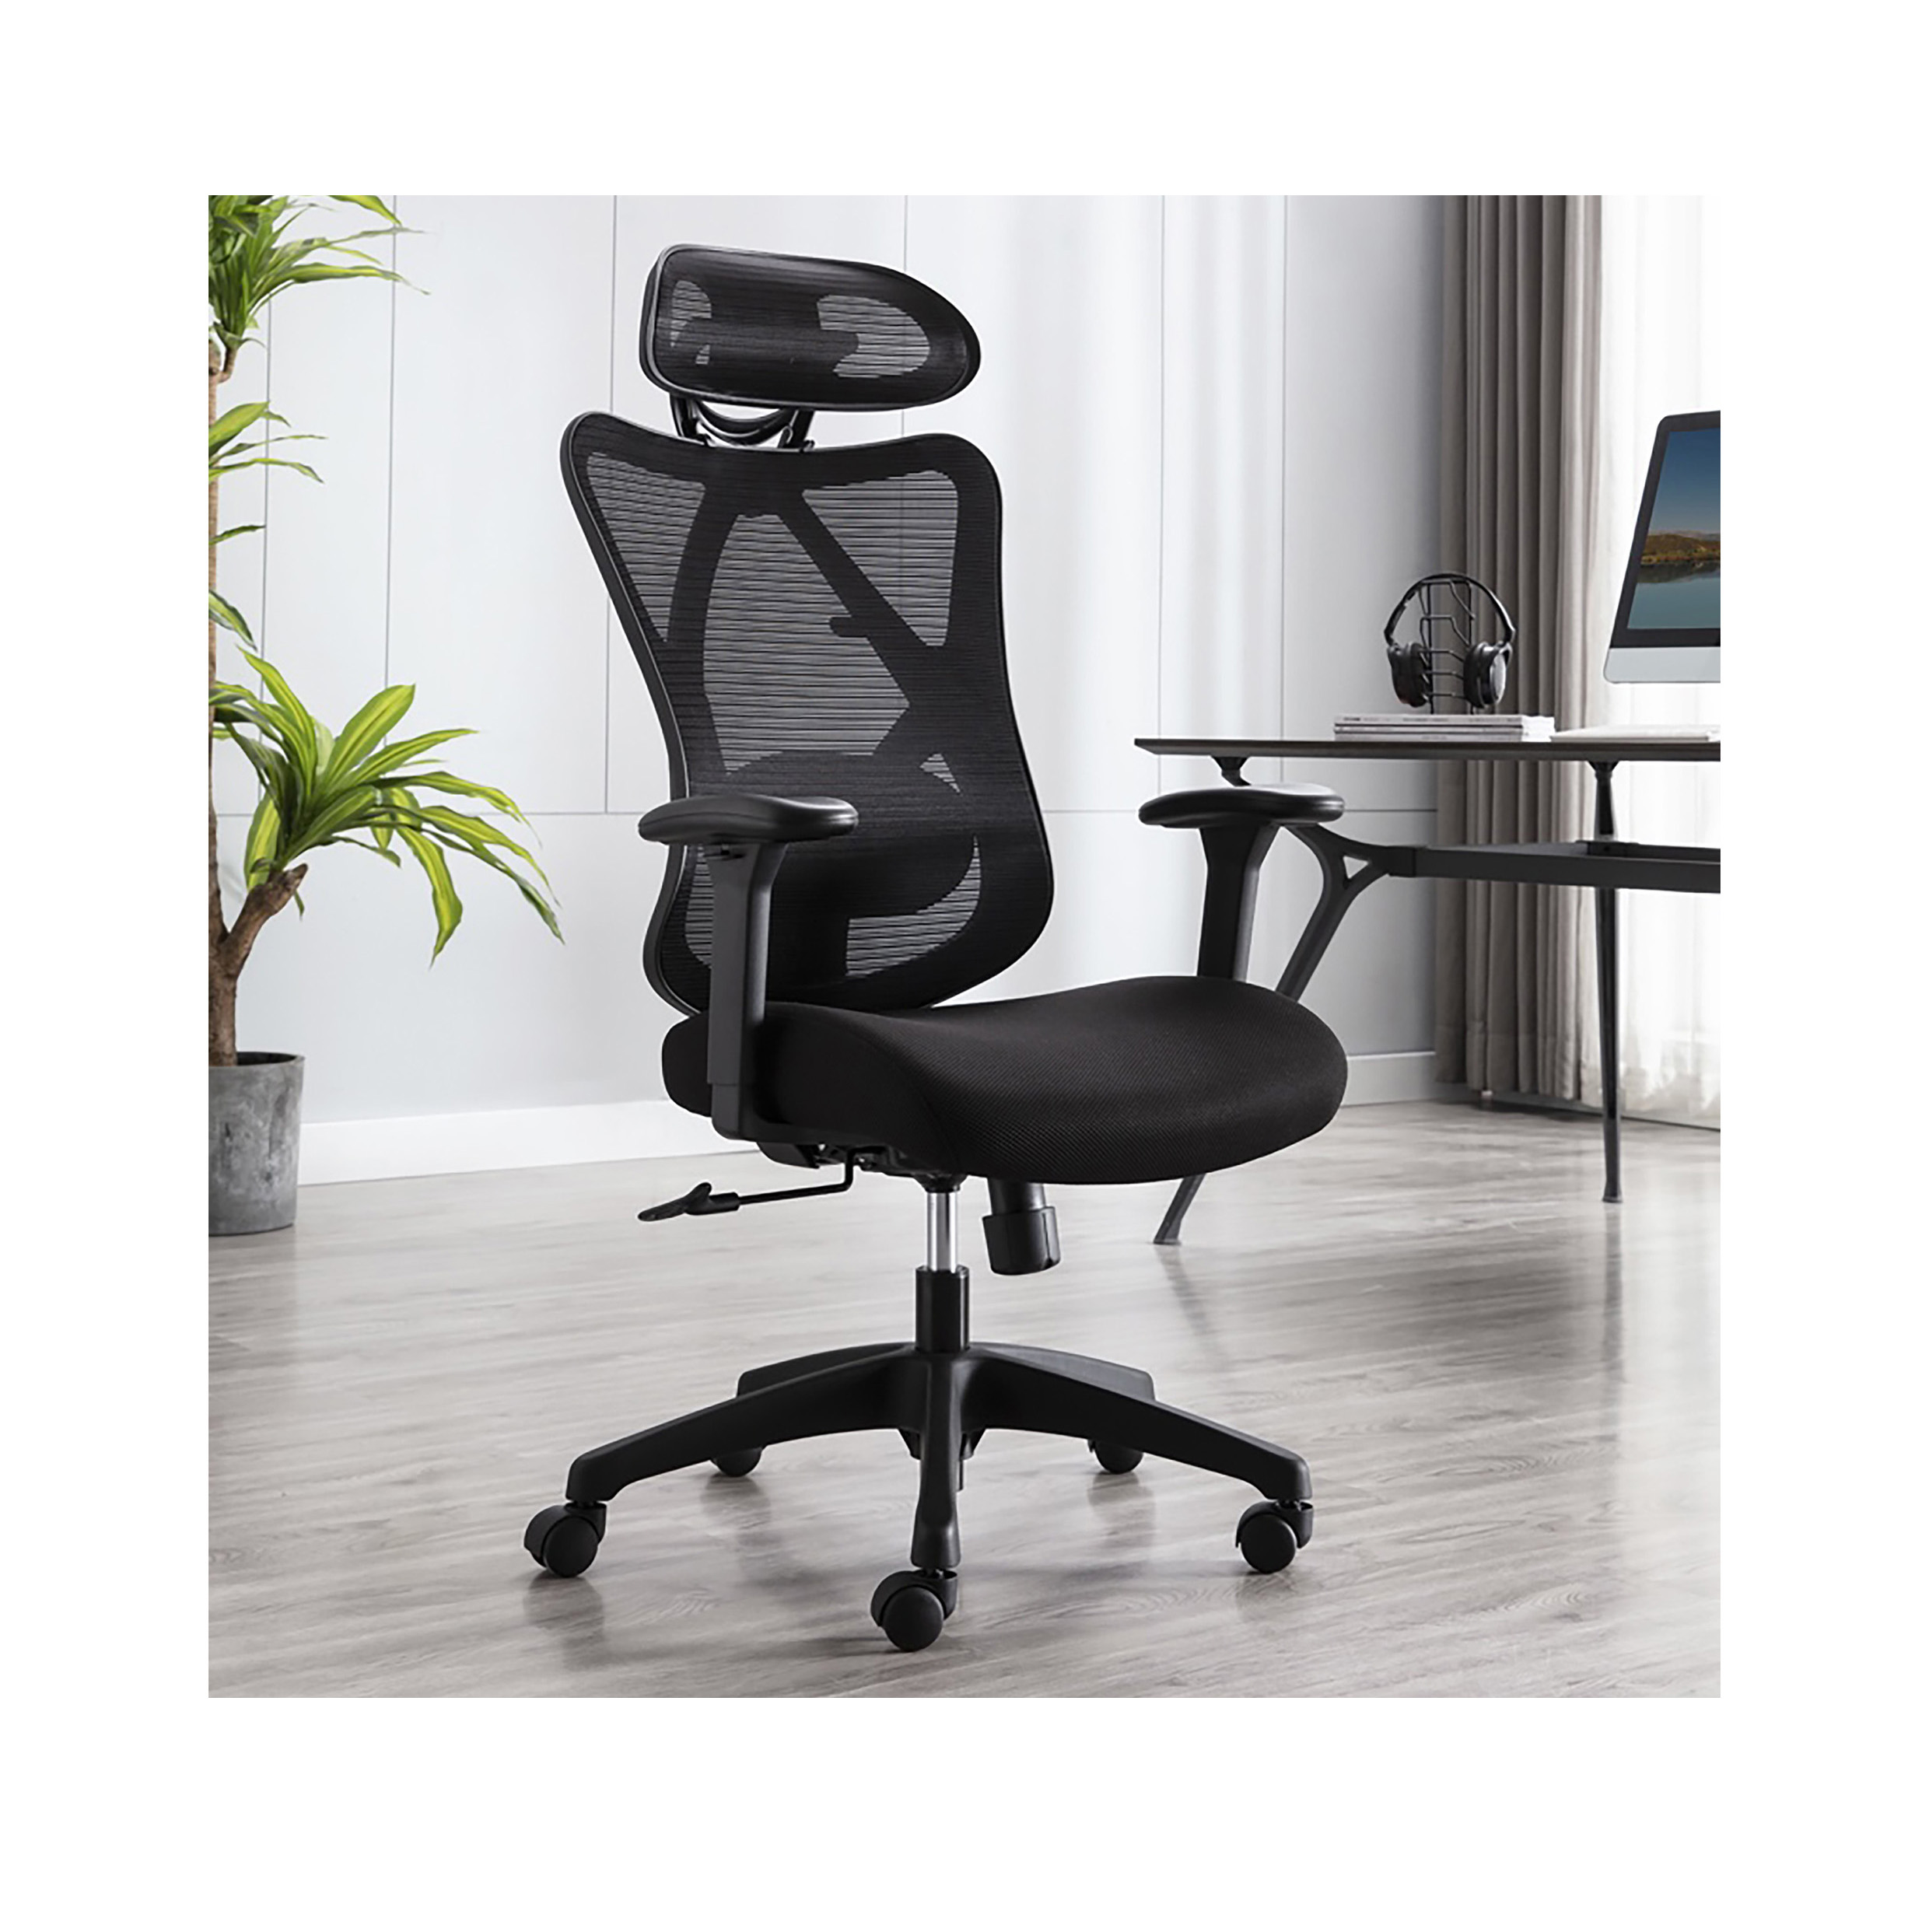 Extra $10 OFF on chairs and desks